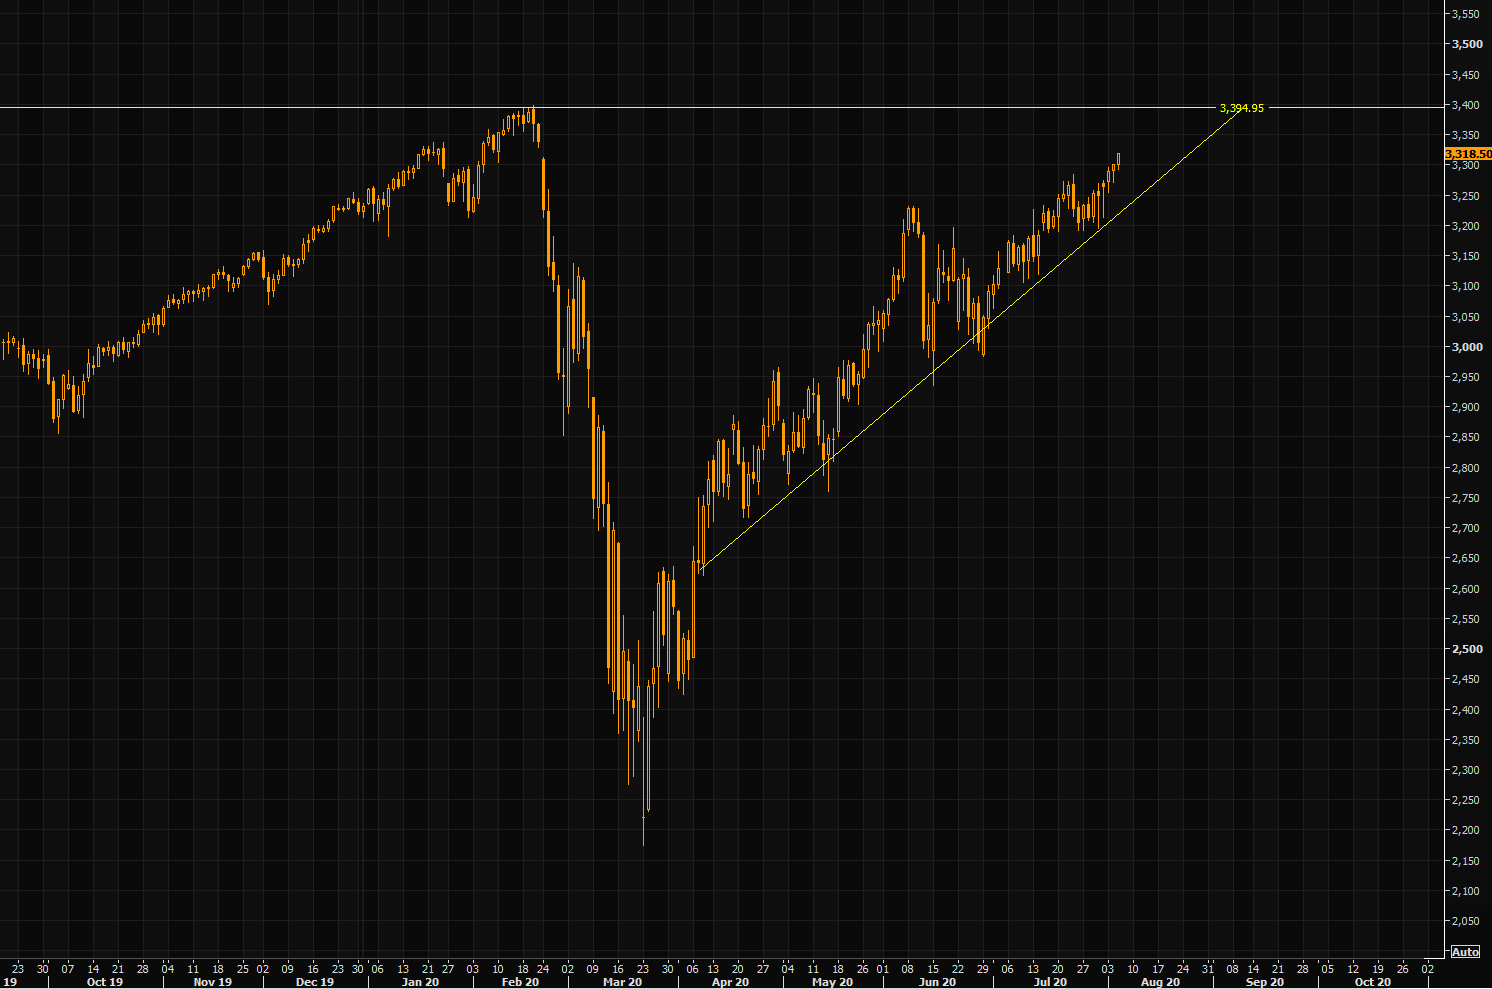 S&P - above the summer box, but the break out lacks proper momentum as we approach huge ATH levels....